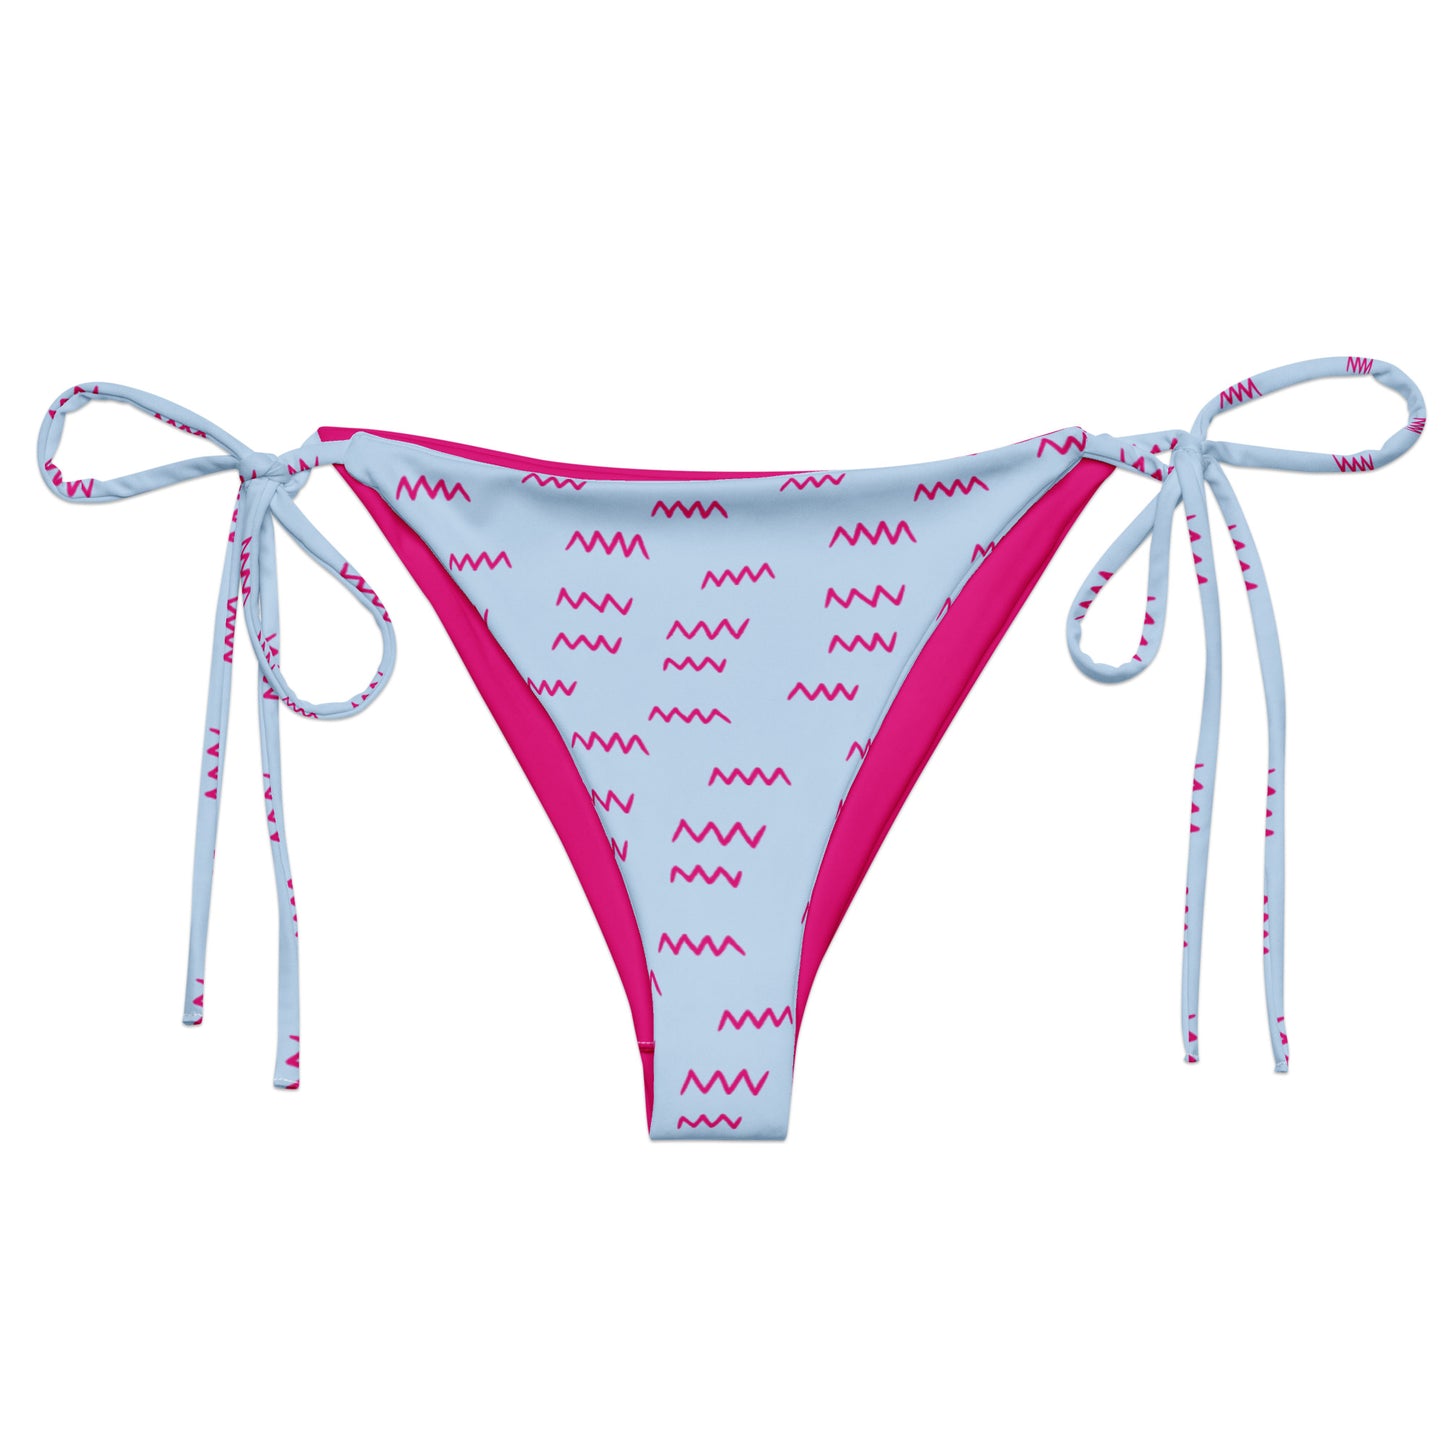 You Need To Start Somewhere Recycled String Bikini Bottom - Mental Health Matters by The Banannie Diaries